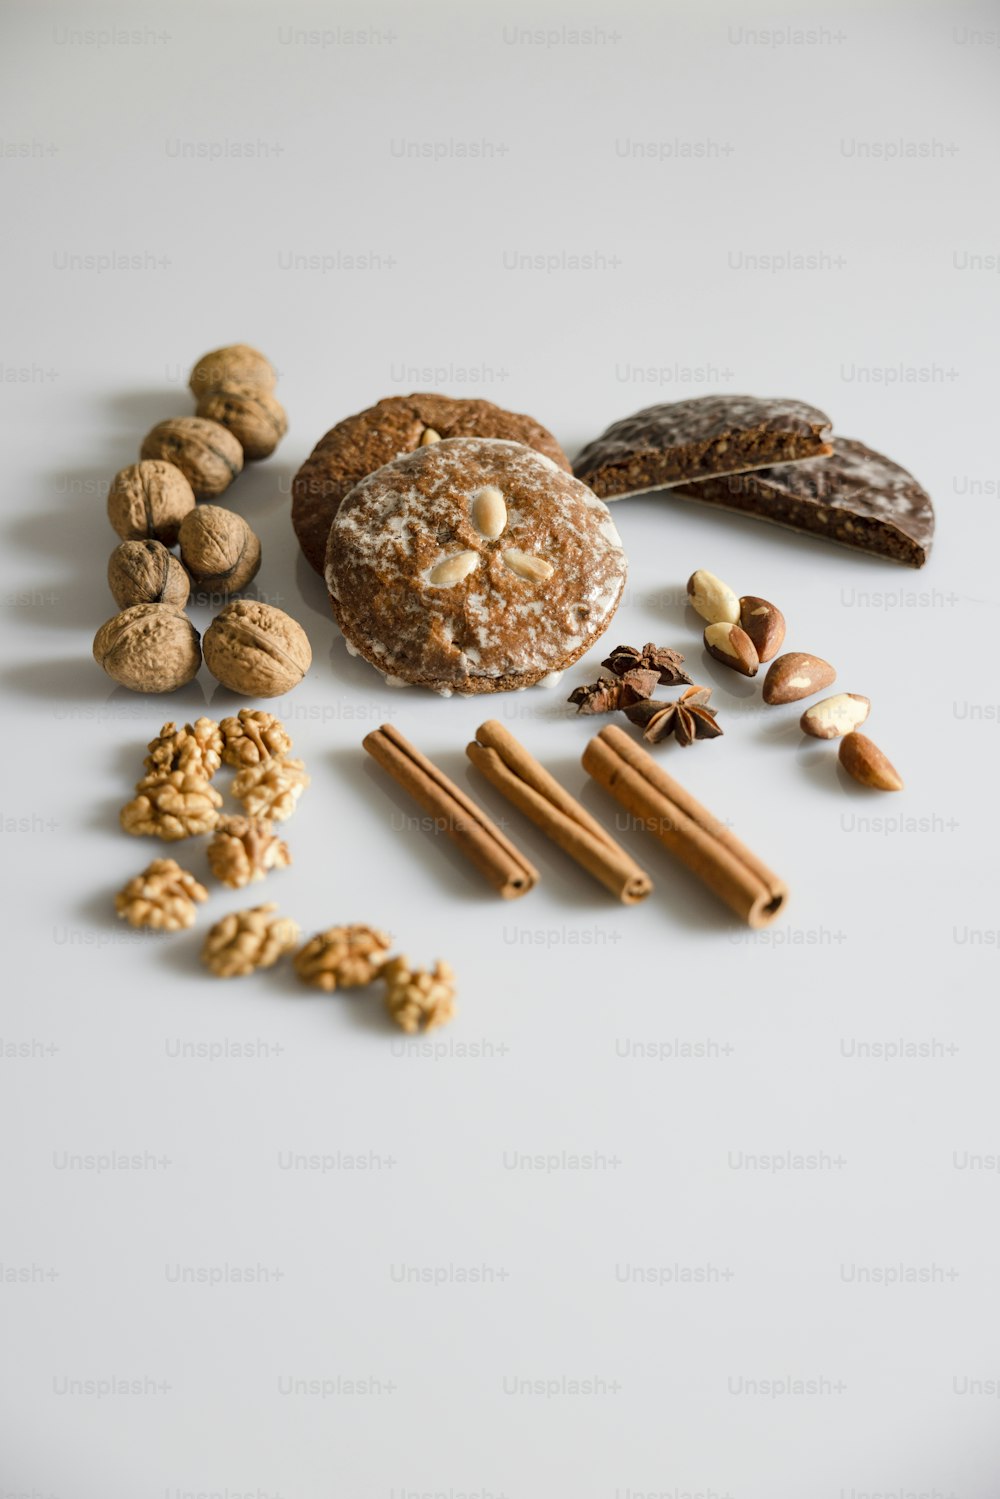 a variety of nuts and nutshells on a white surface